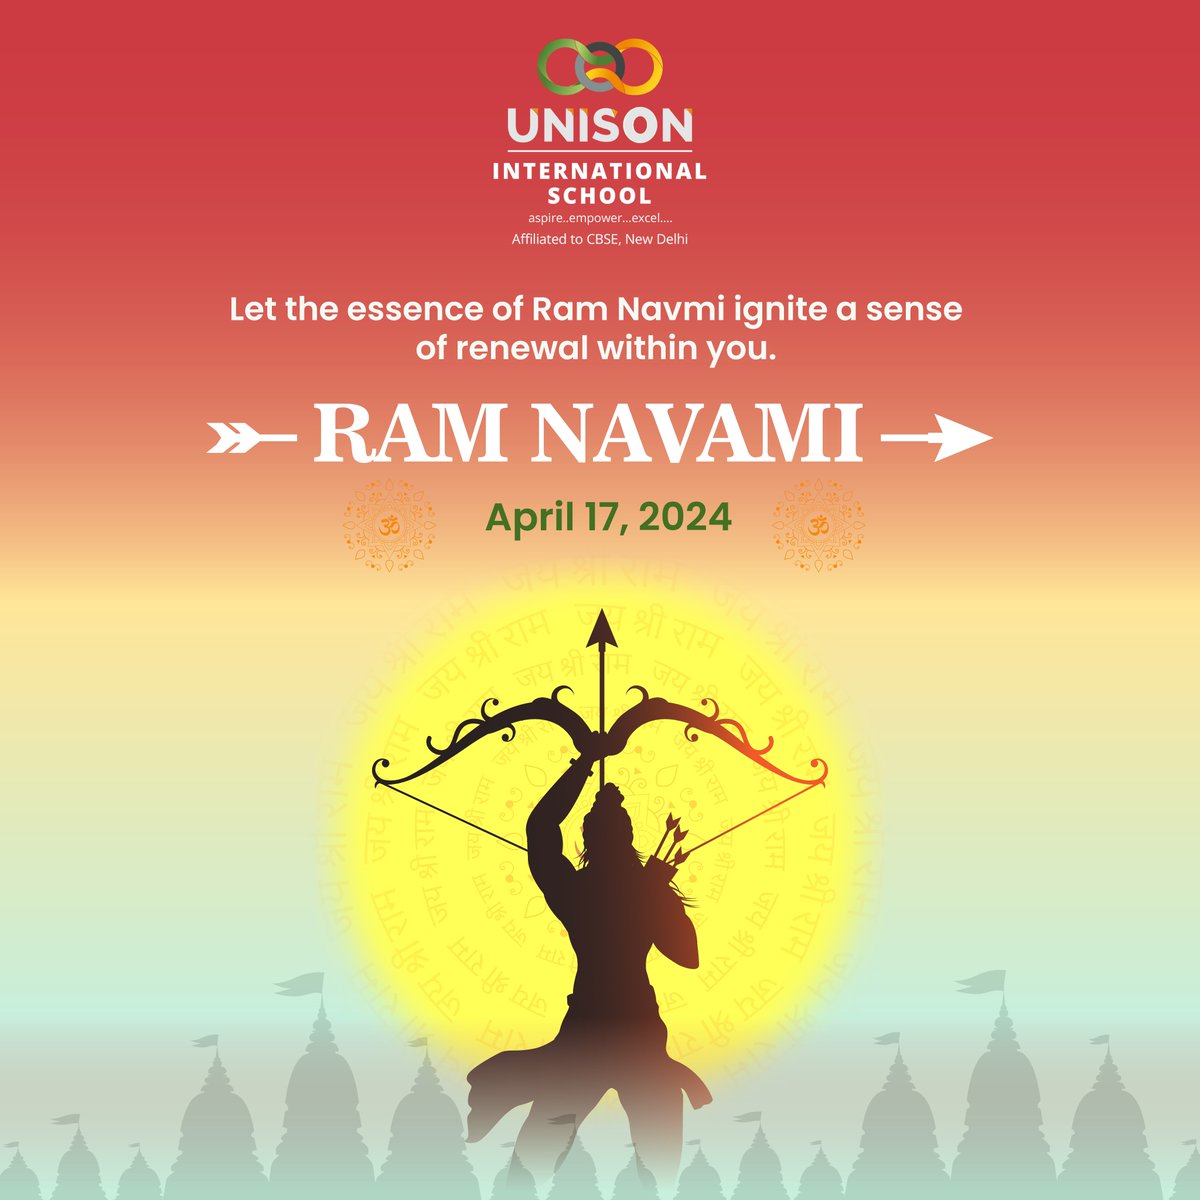 Embrace the teachings of Lord Rama and find strength and courage to overcome obstacles in your life✨

#BlessingsOfRama #HappyRamNavami  #UnisonInternationalSchool #Excellence #Academics #ExtracurricularActivities #FutureLeaders #CBSESchool #21stCenturyCurriculum #FunLearning